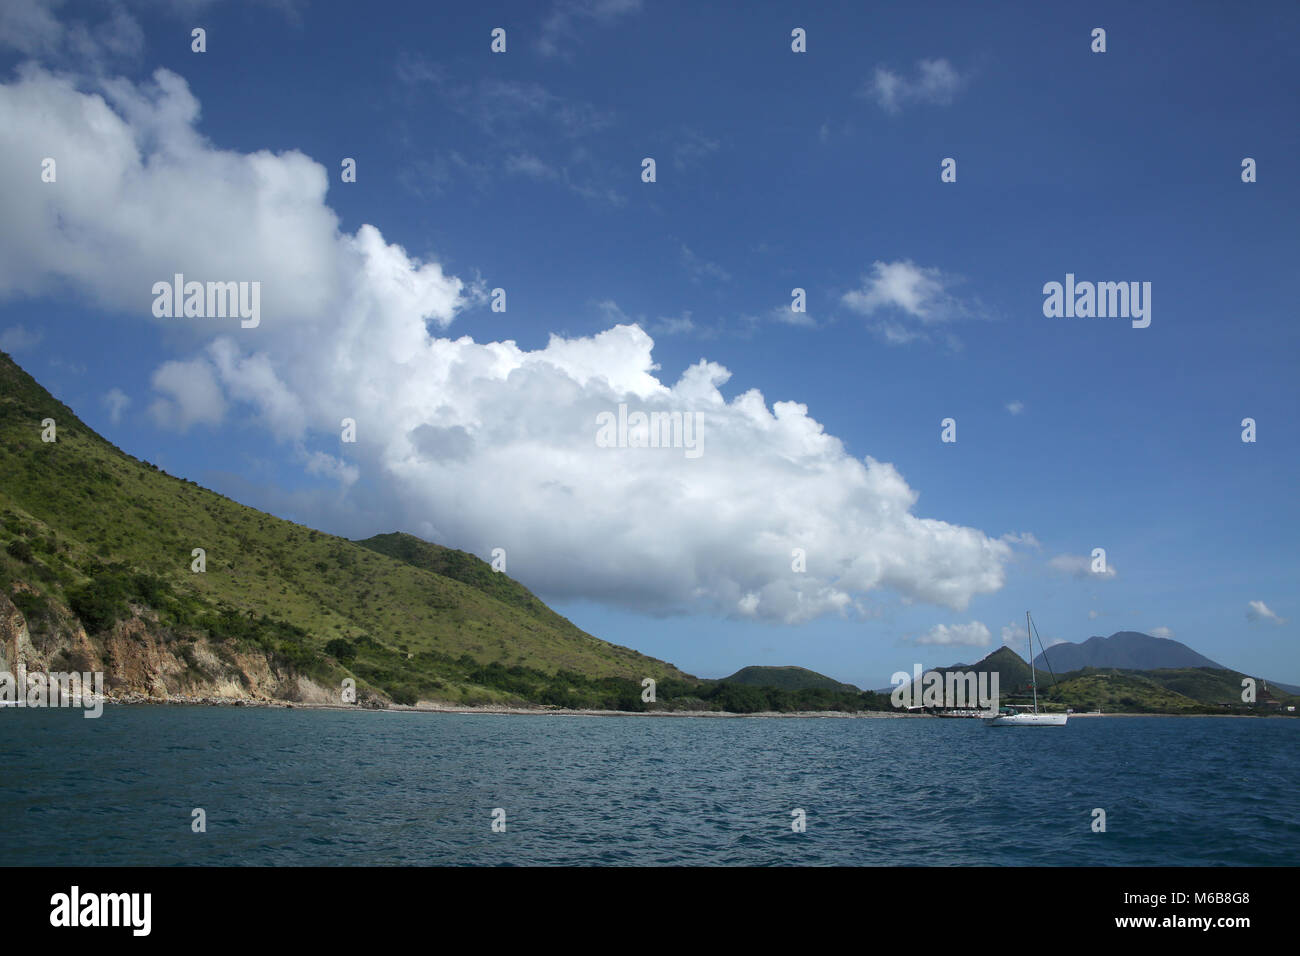 View of the coastline from the sea with a sailing boat, St Kitts, Caribbean. Stock Photo